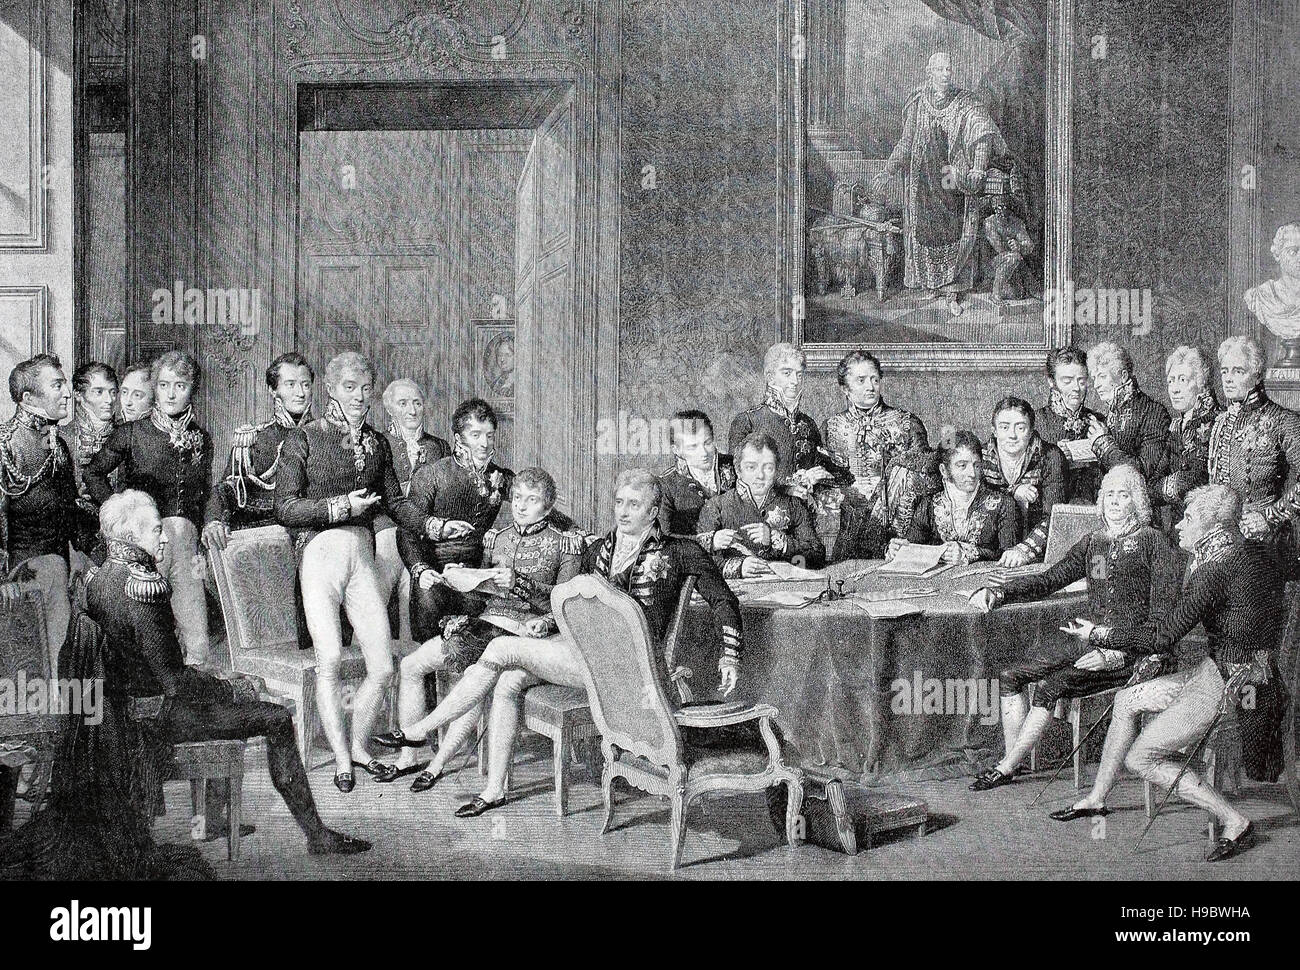 The Congress of Vienna German: Wiener Kongress was a conference of ambassadors of European states chaired by Austrian statesman Klemens Wenzel von Metternich, and held in Vienna from November 1814 to June 1815, historical illustration Stock Photo